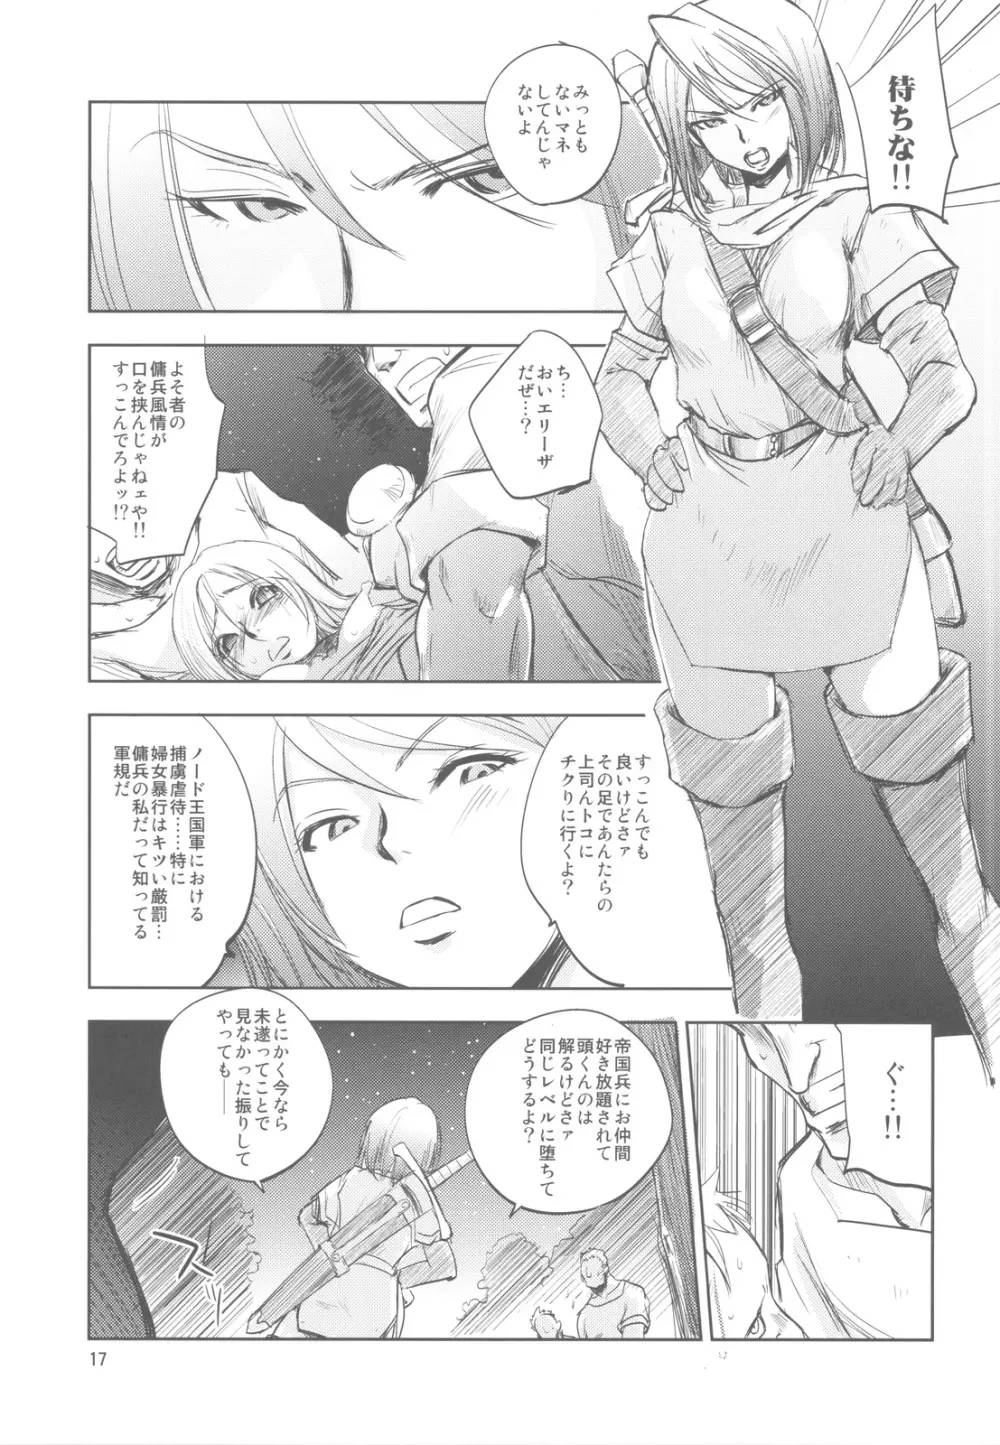 GRASSEN'S WAR ANOTHER STORY Ex #01 ノード侵攻 I Page.16